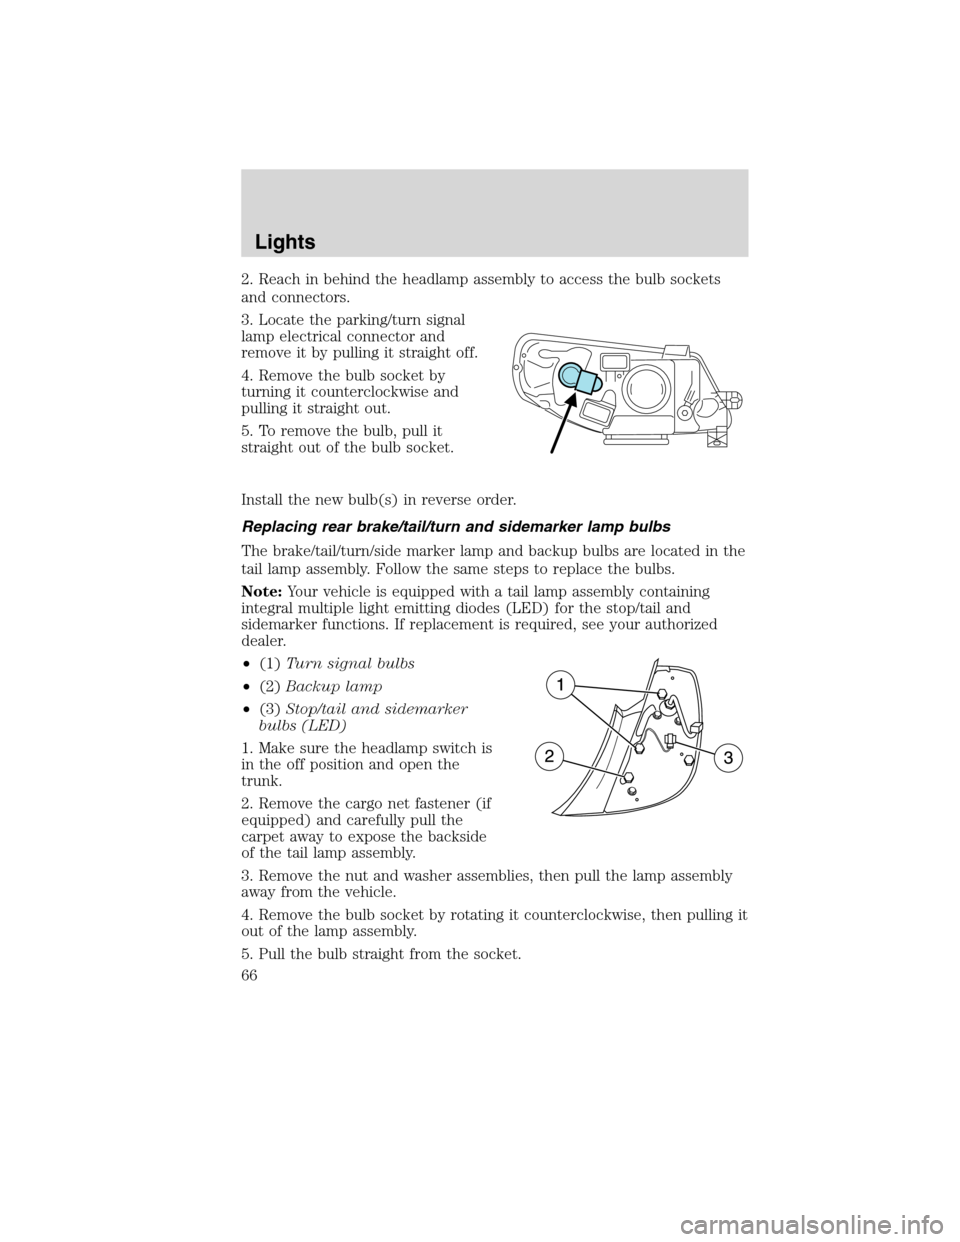 LINCOLN MKS 2010  Owners Manual 2. Reach in behind the headlamp assembly to access the bulb sockets
and connectors.
3. Locate the parking/turn signal
lamp electrical connector and
remove it by pulling it straight off.
4. Remove the 